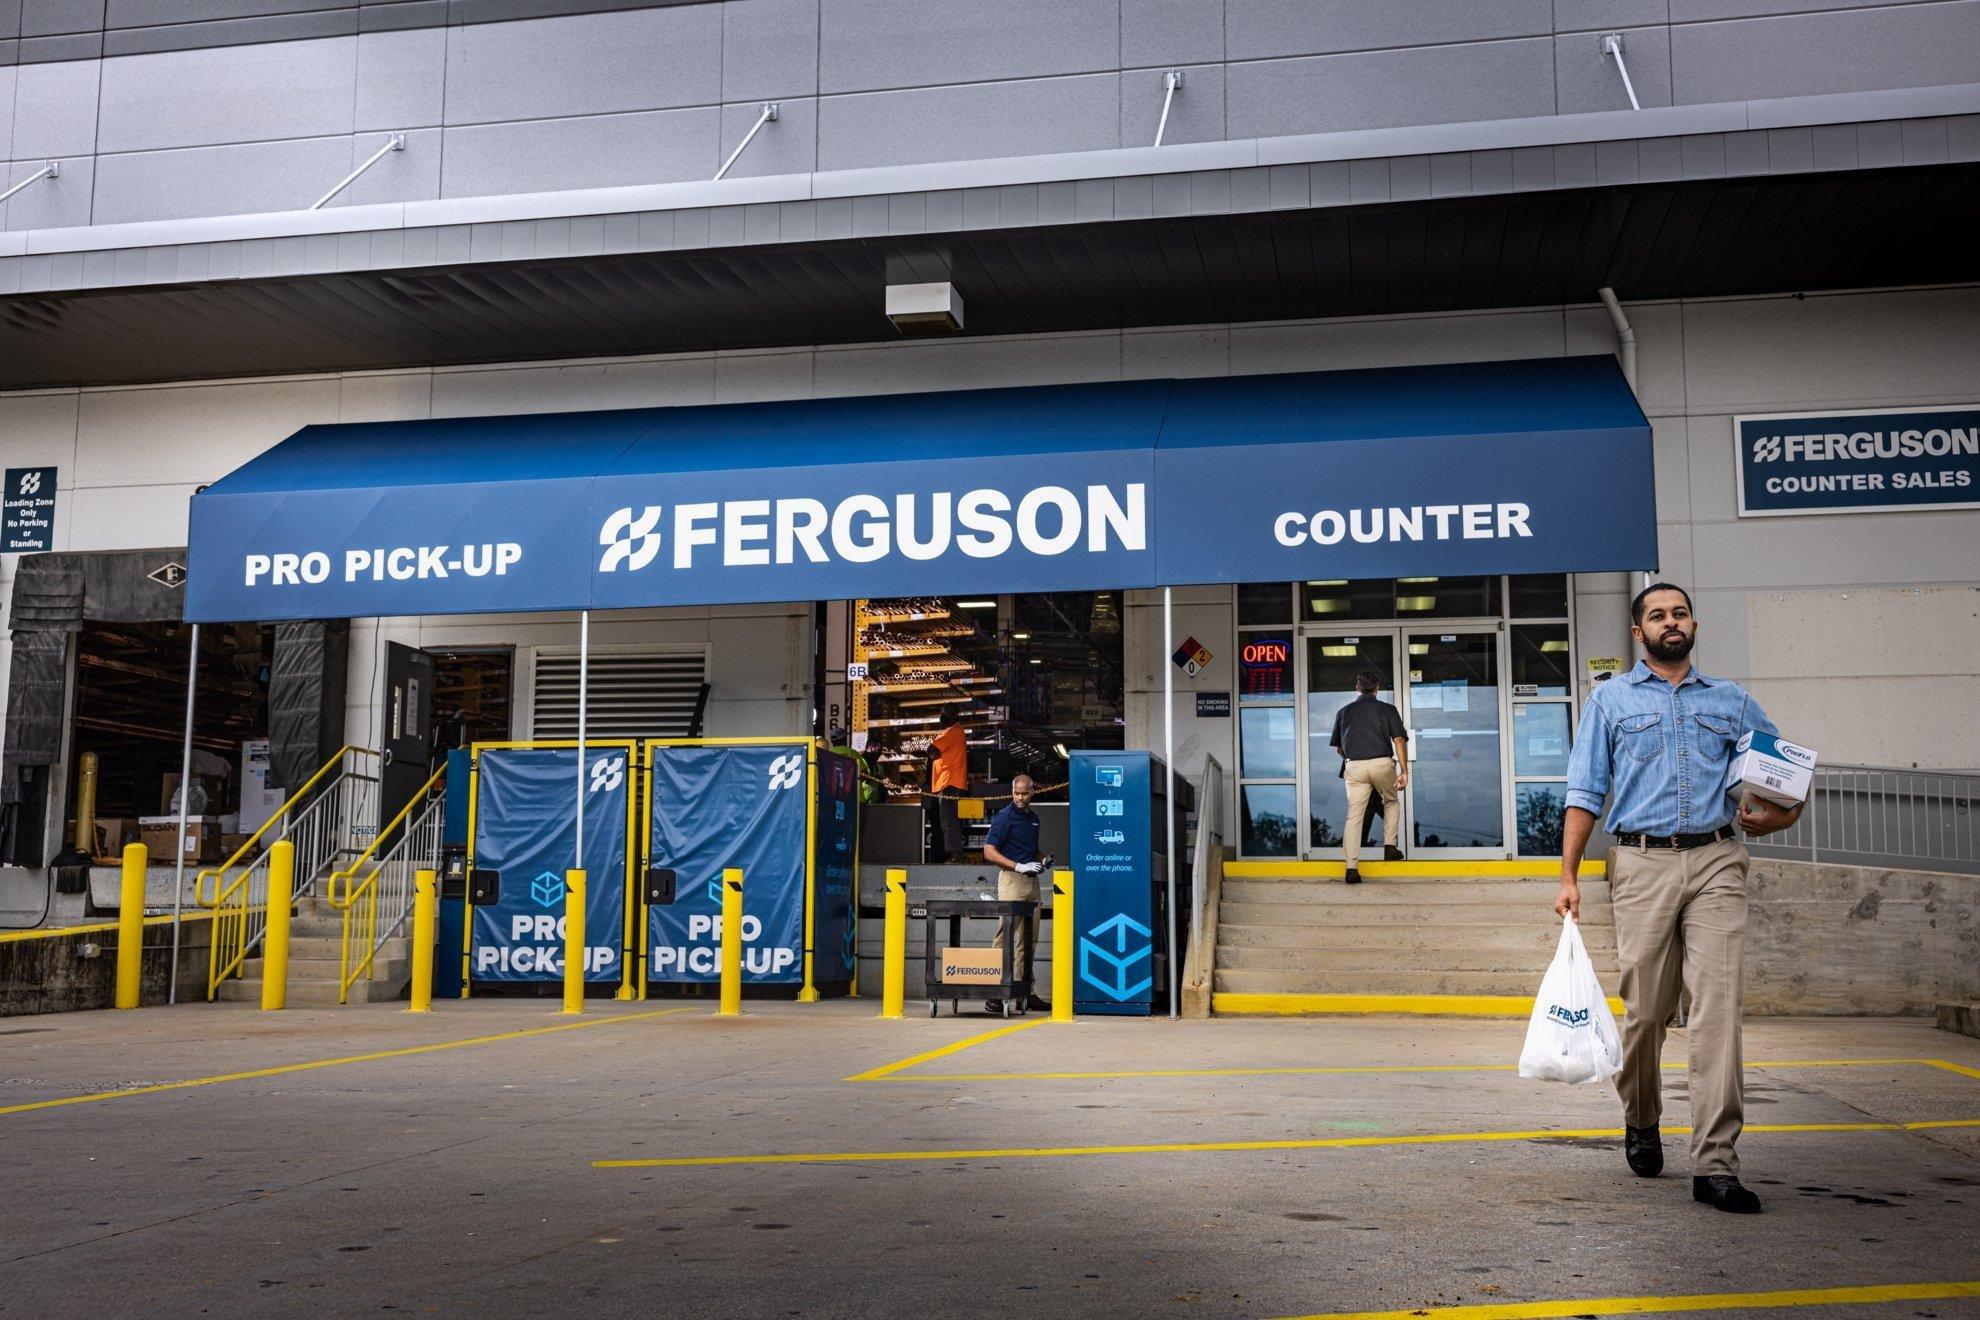 A contractor carries items in a bag while leaving a Ferguson Counter location.